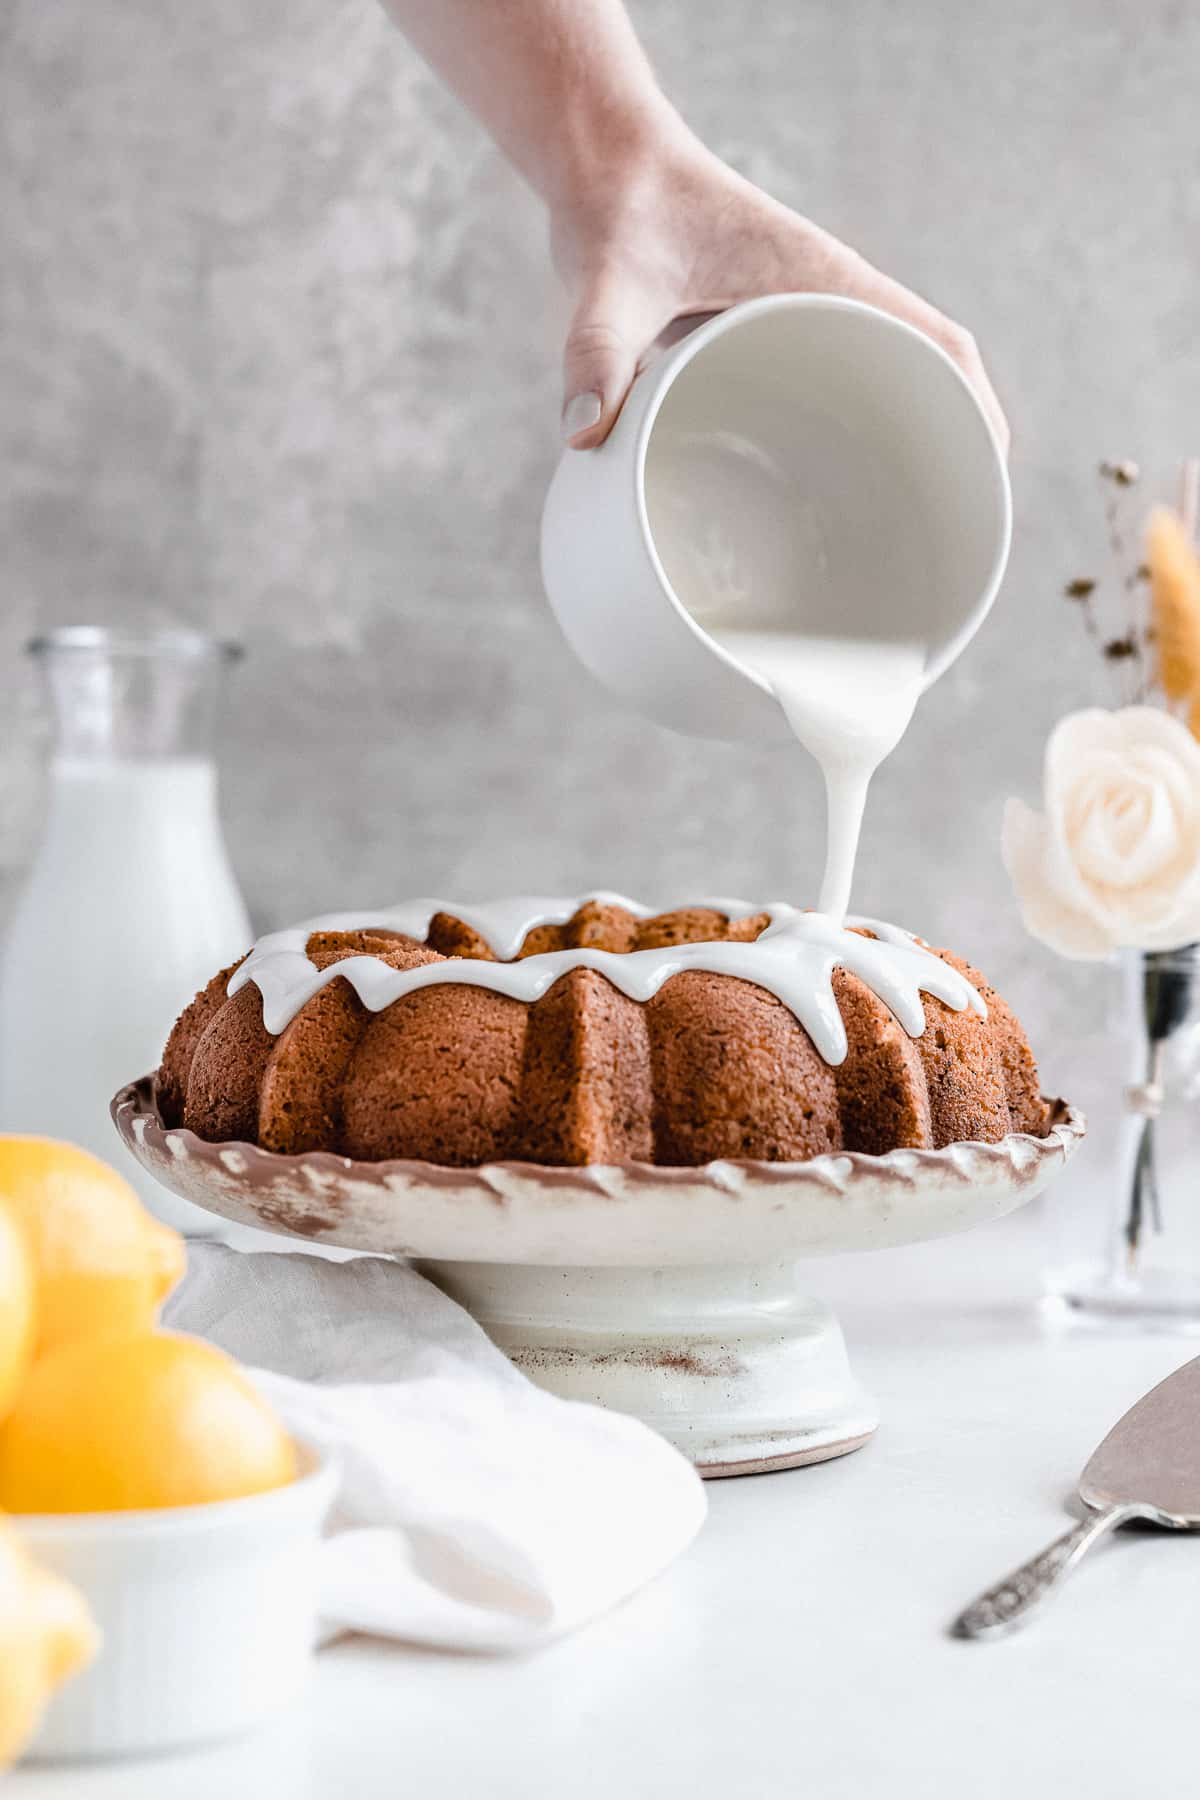 Side view photo of the freshly baked Citrus-y Gluten Free Lemon Poppy Seed Bundt Cake sitting on a cake plate with a hand holding a jar of icing from above and pouring the icing over the cake.  A carafe of milk and a bowl of lemons can be seen in the background.  